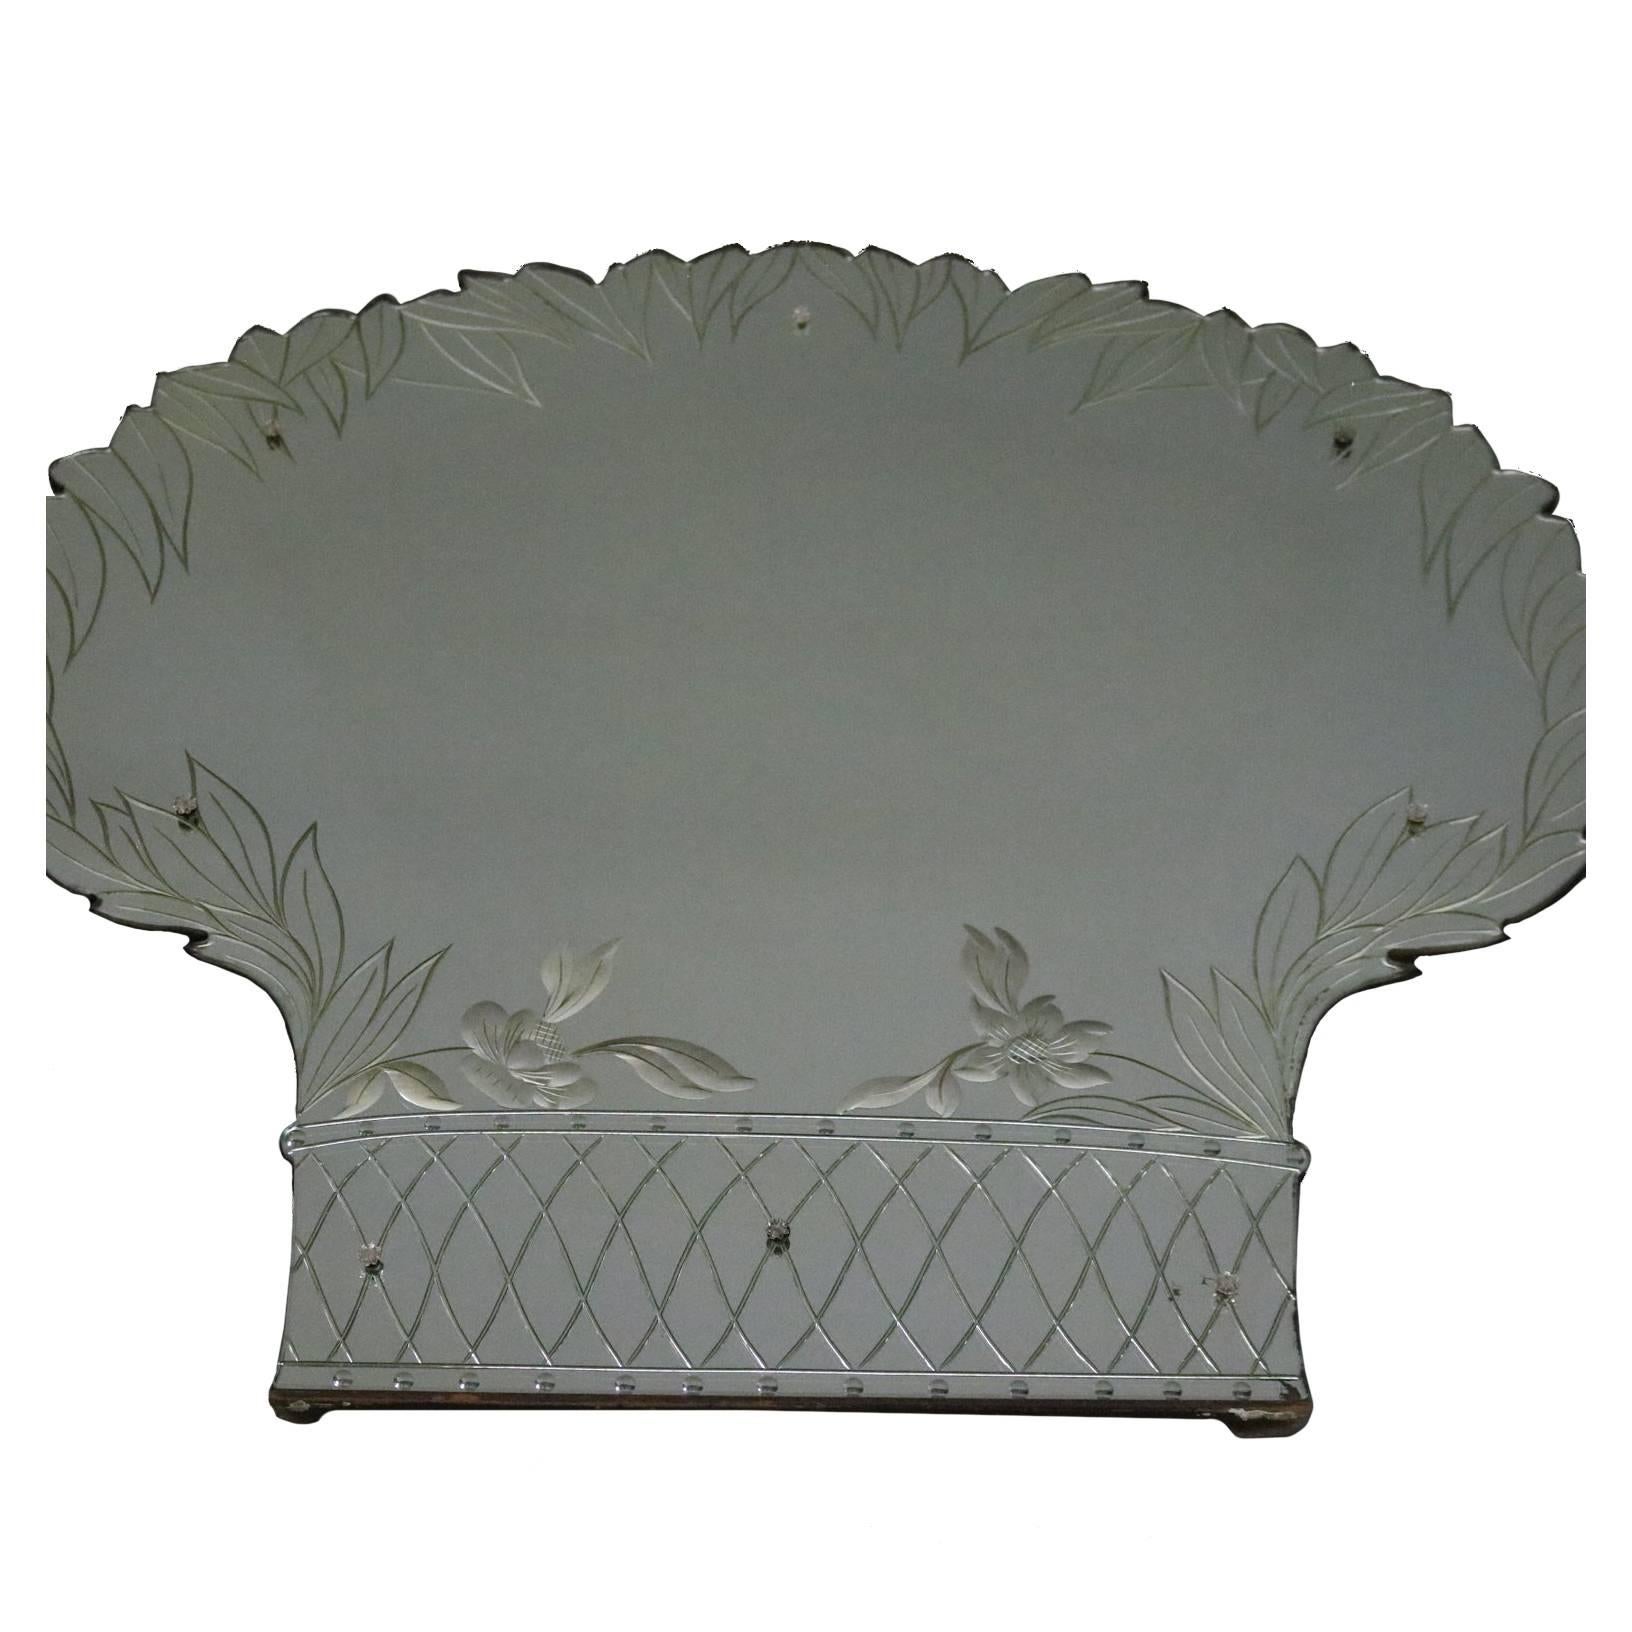 Antique Art Deco Reverse Carved Wall Mirror, Basket-of-flowers, circa 1930